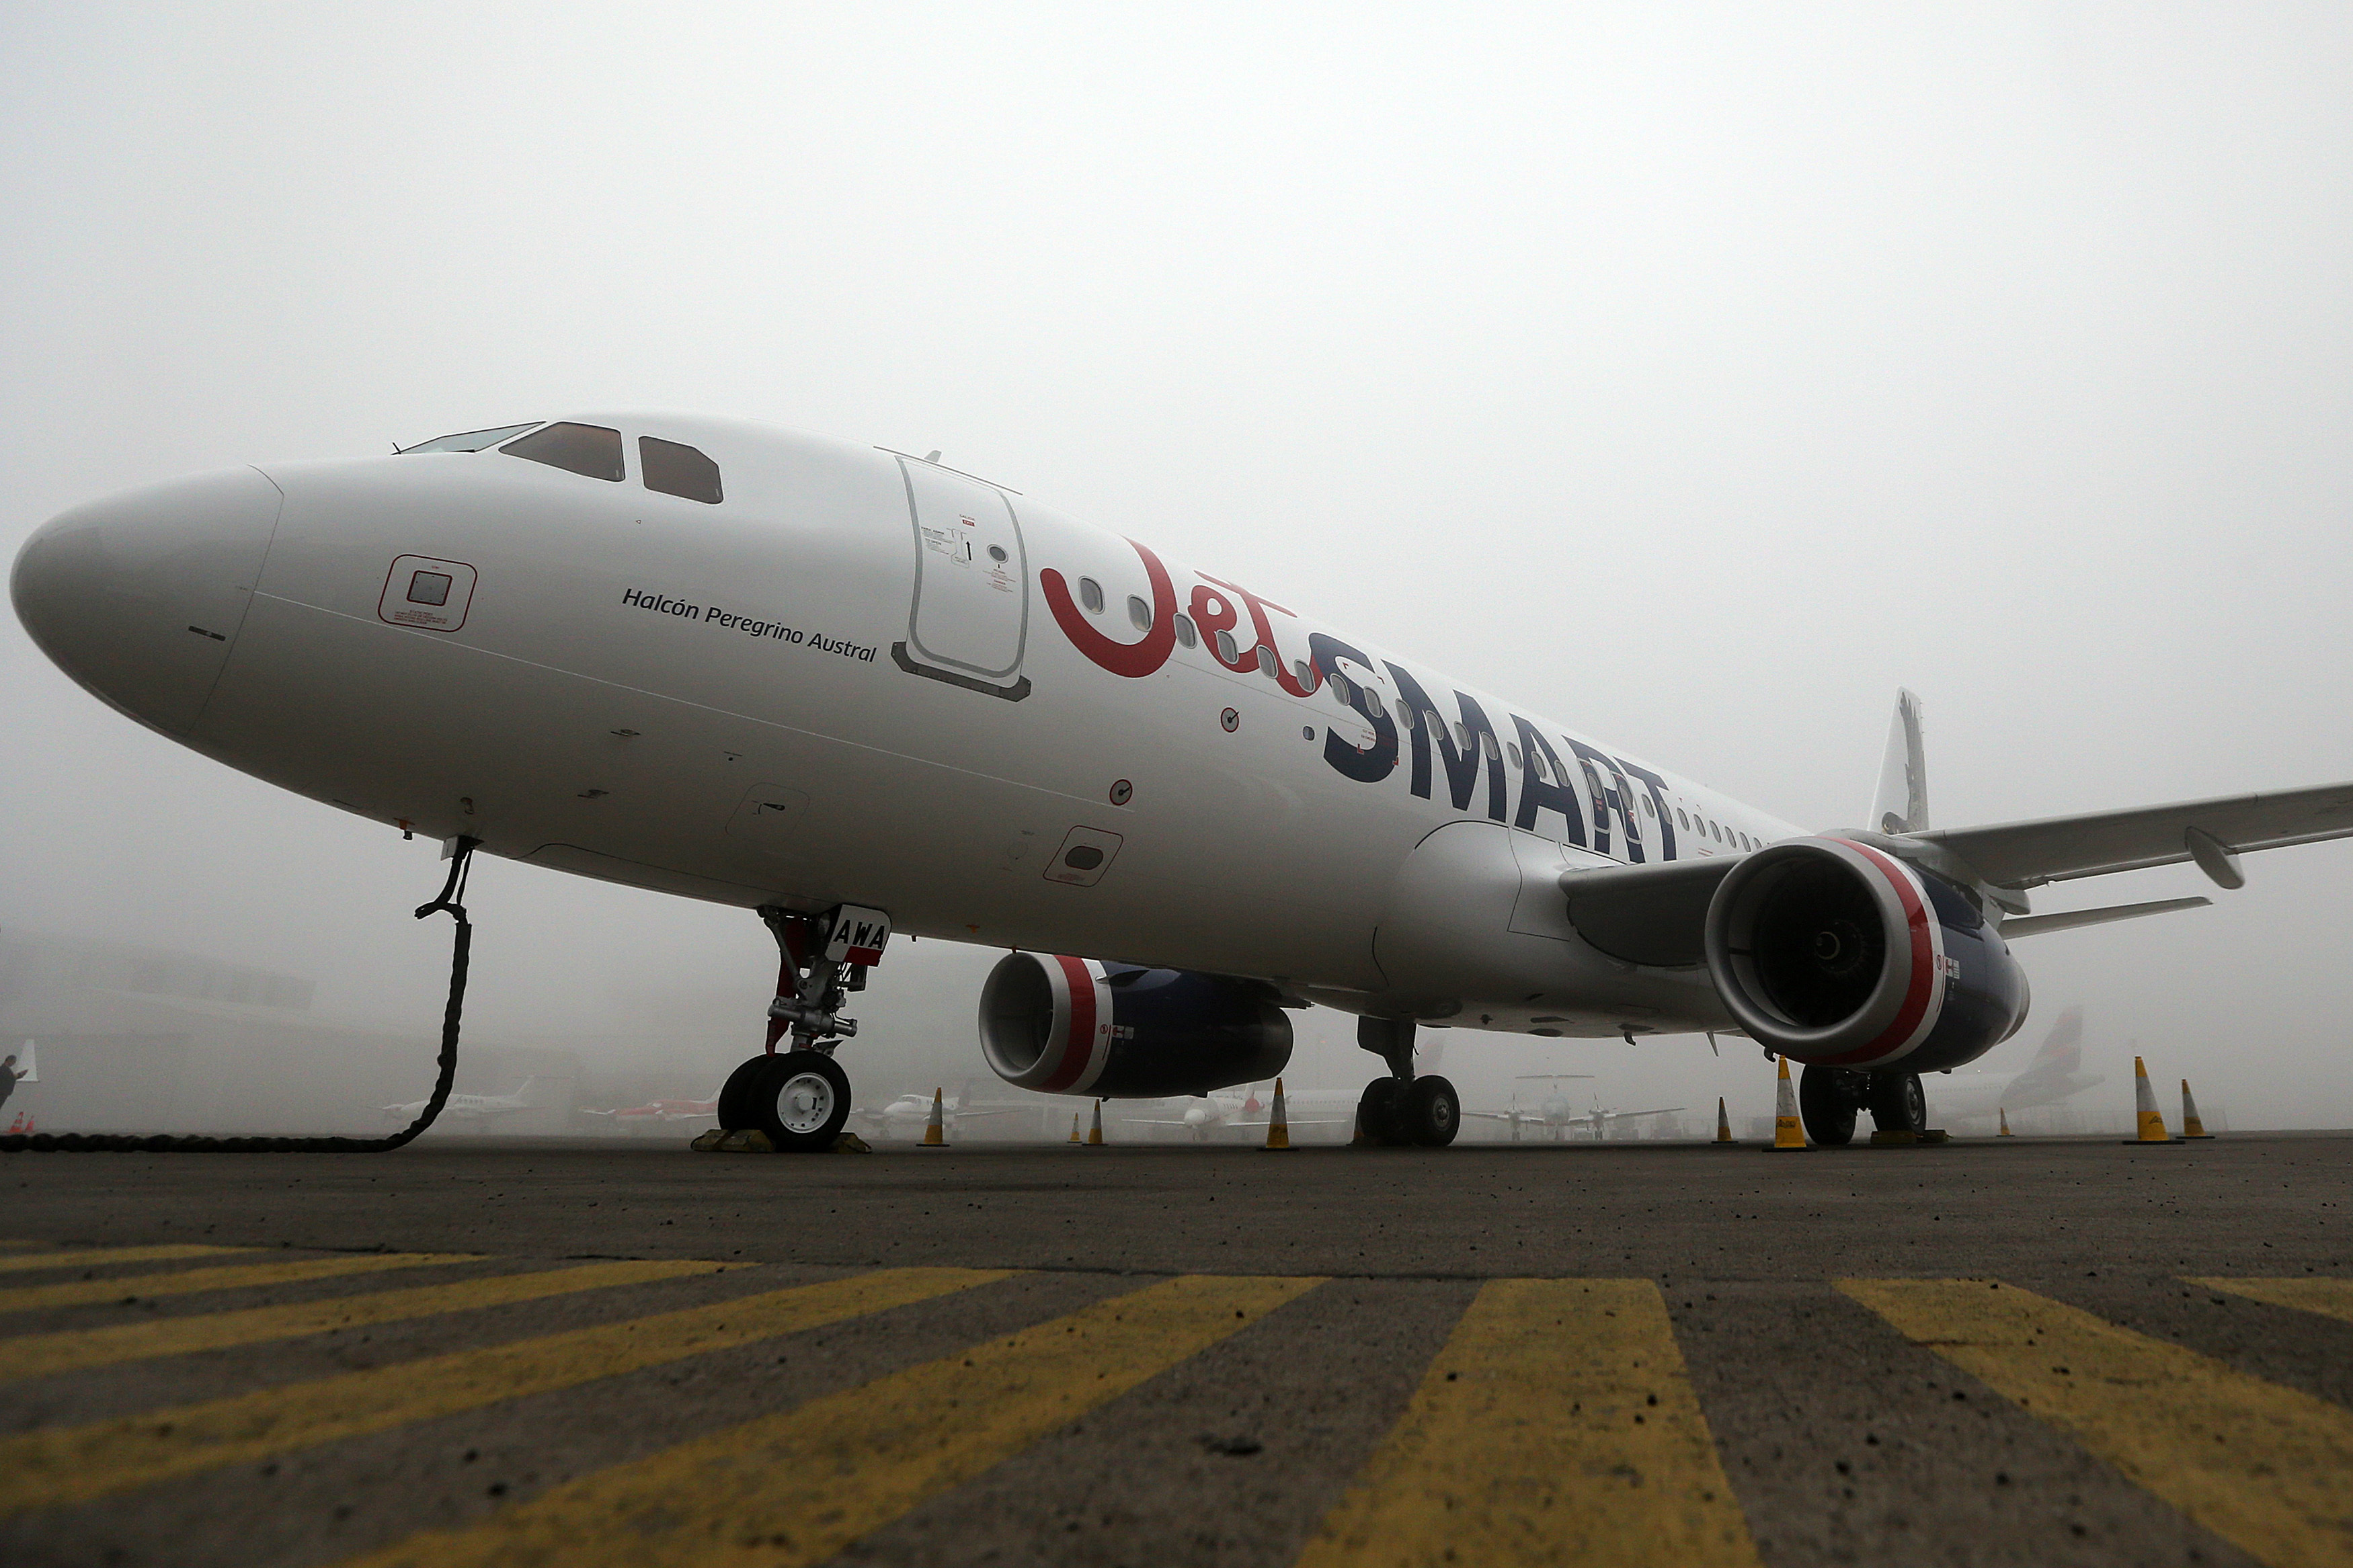 JetSmart is one of the strongest airlines in South America.  EFE